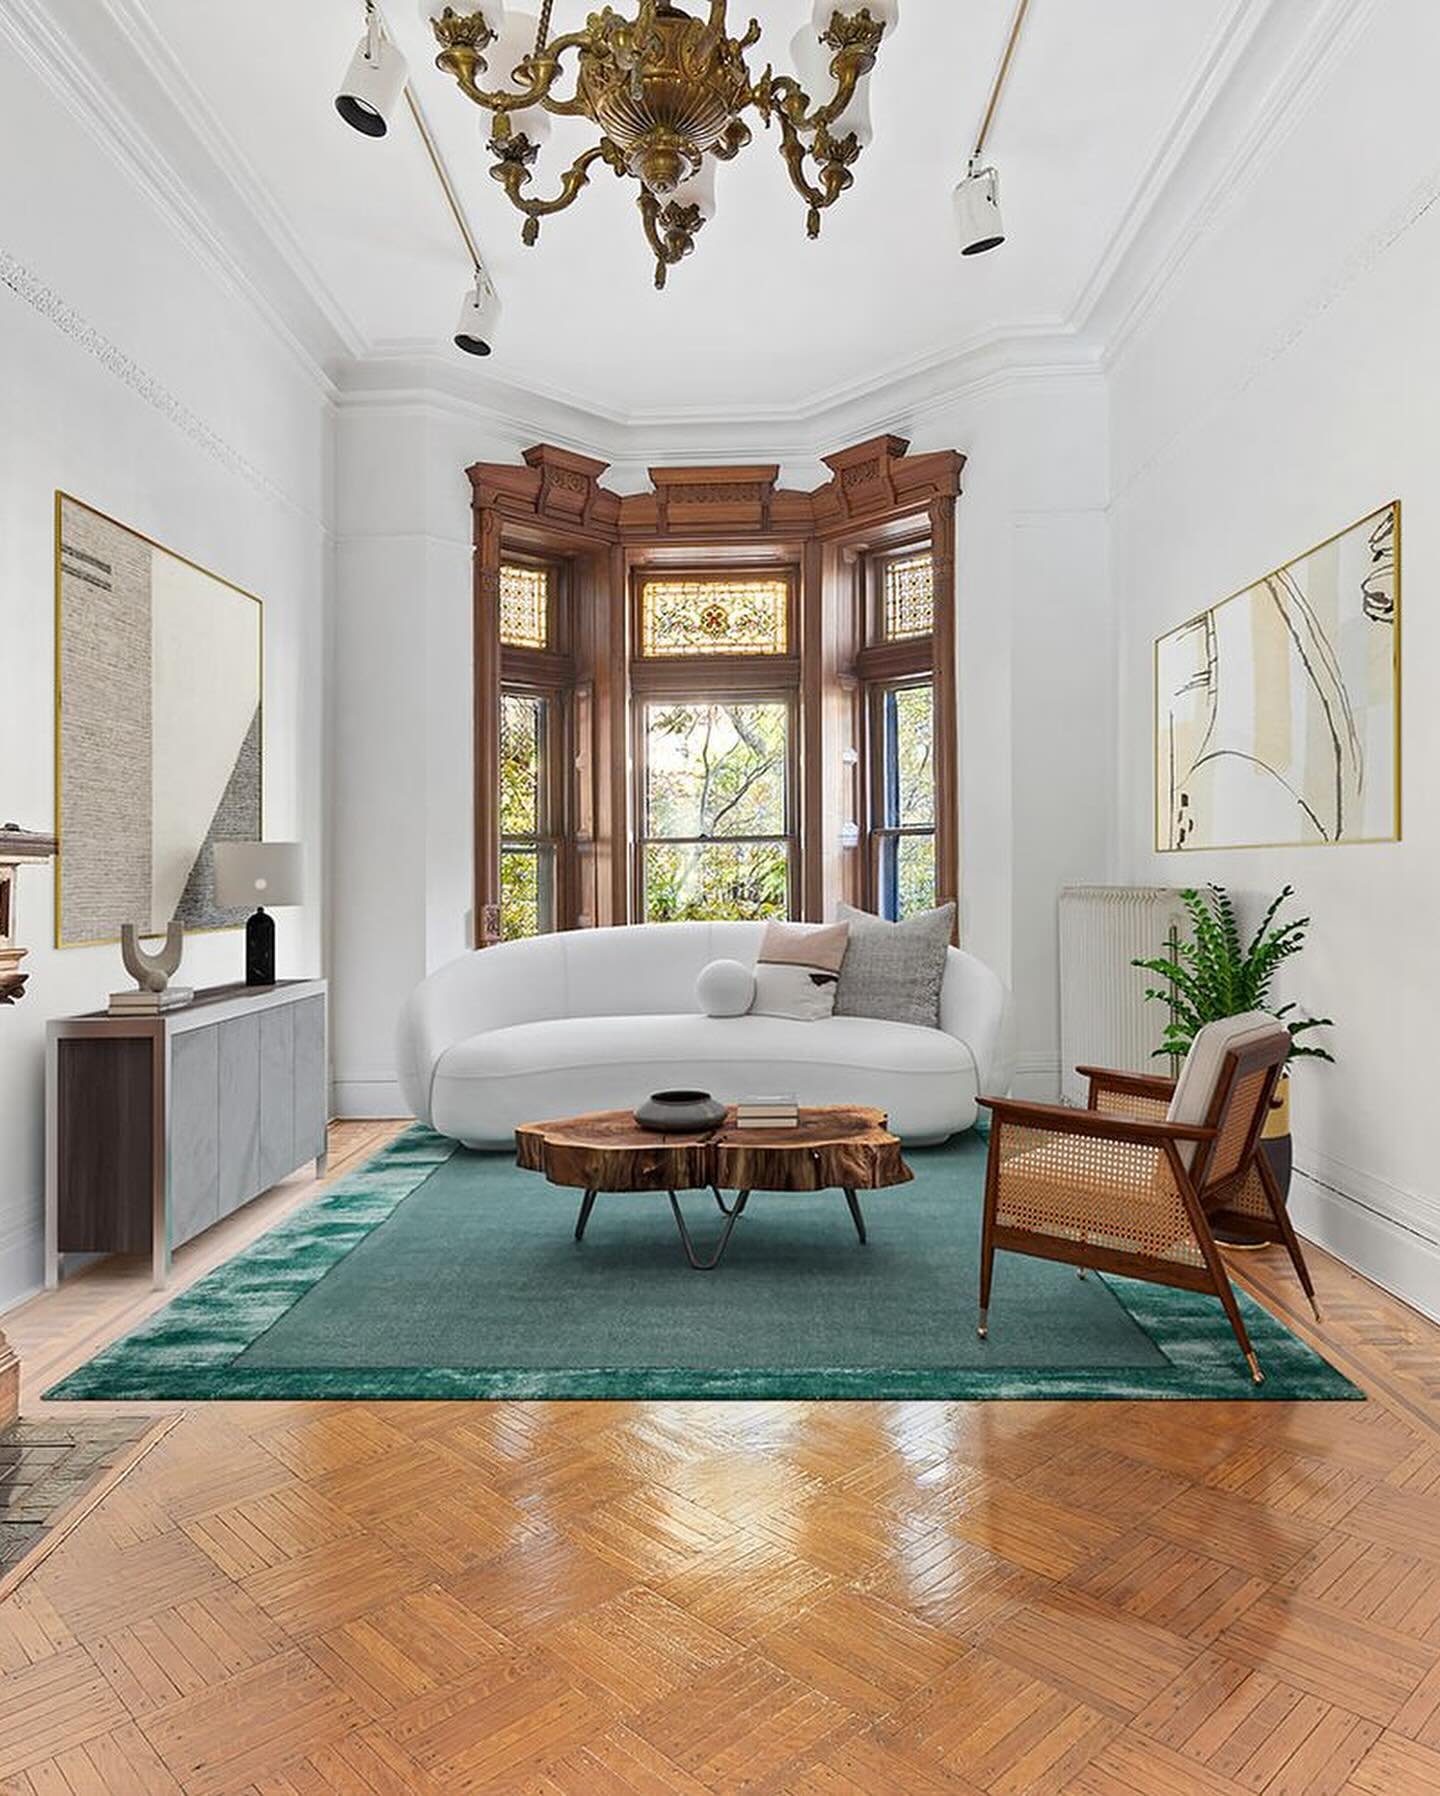 This townhouse is the epitome of a legacy home - a place where countless memories are made ✨It&rsquo;s one of Park Slope&rsquo;s most historically significant residences, and in my view, one of the most stunning townhomes in Brooklyn. Now, it&rsquo;s